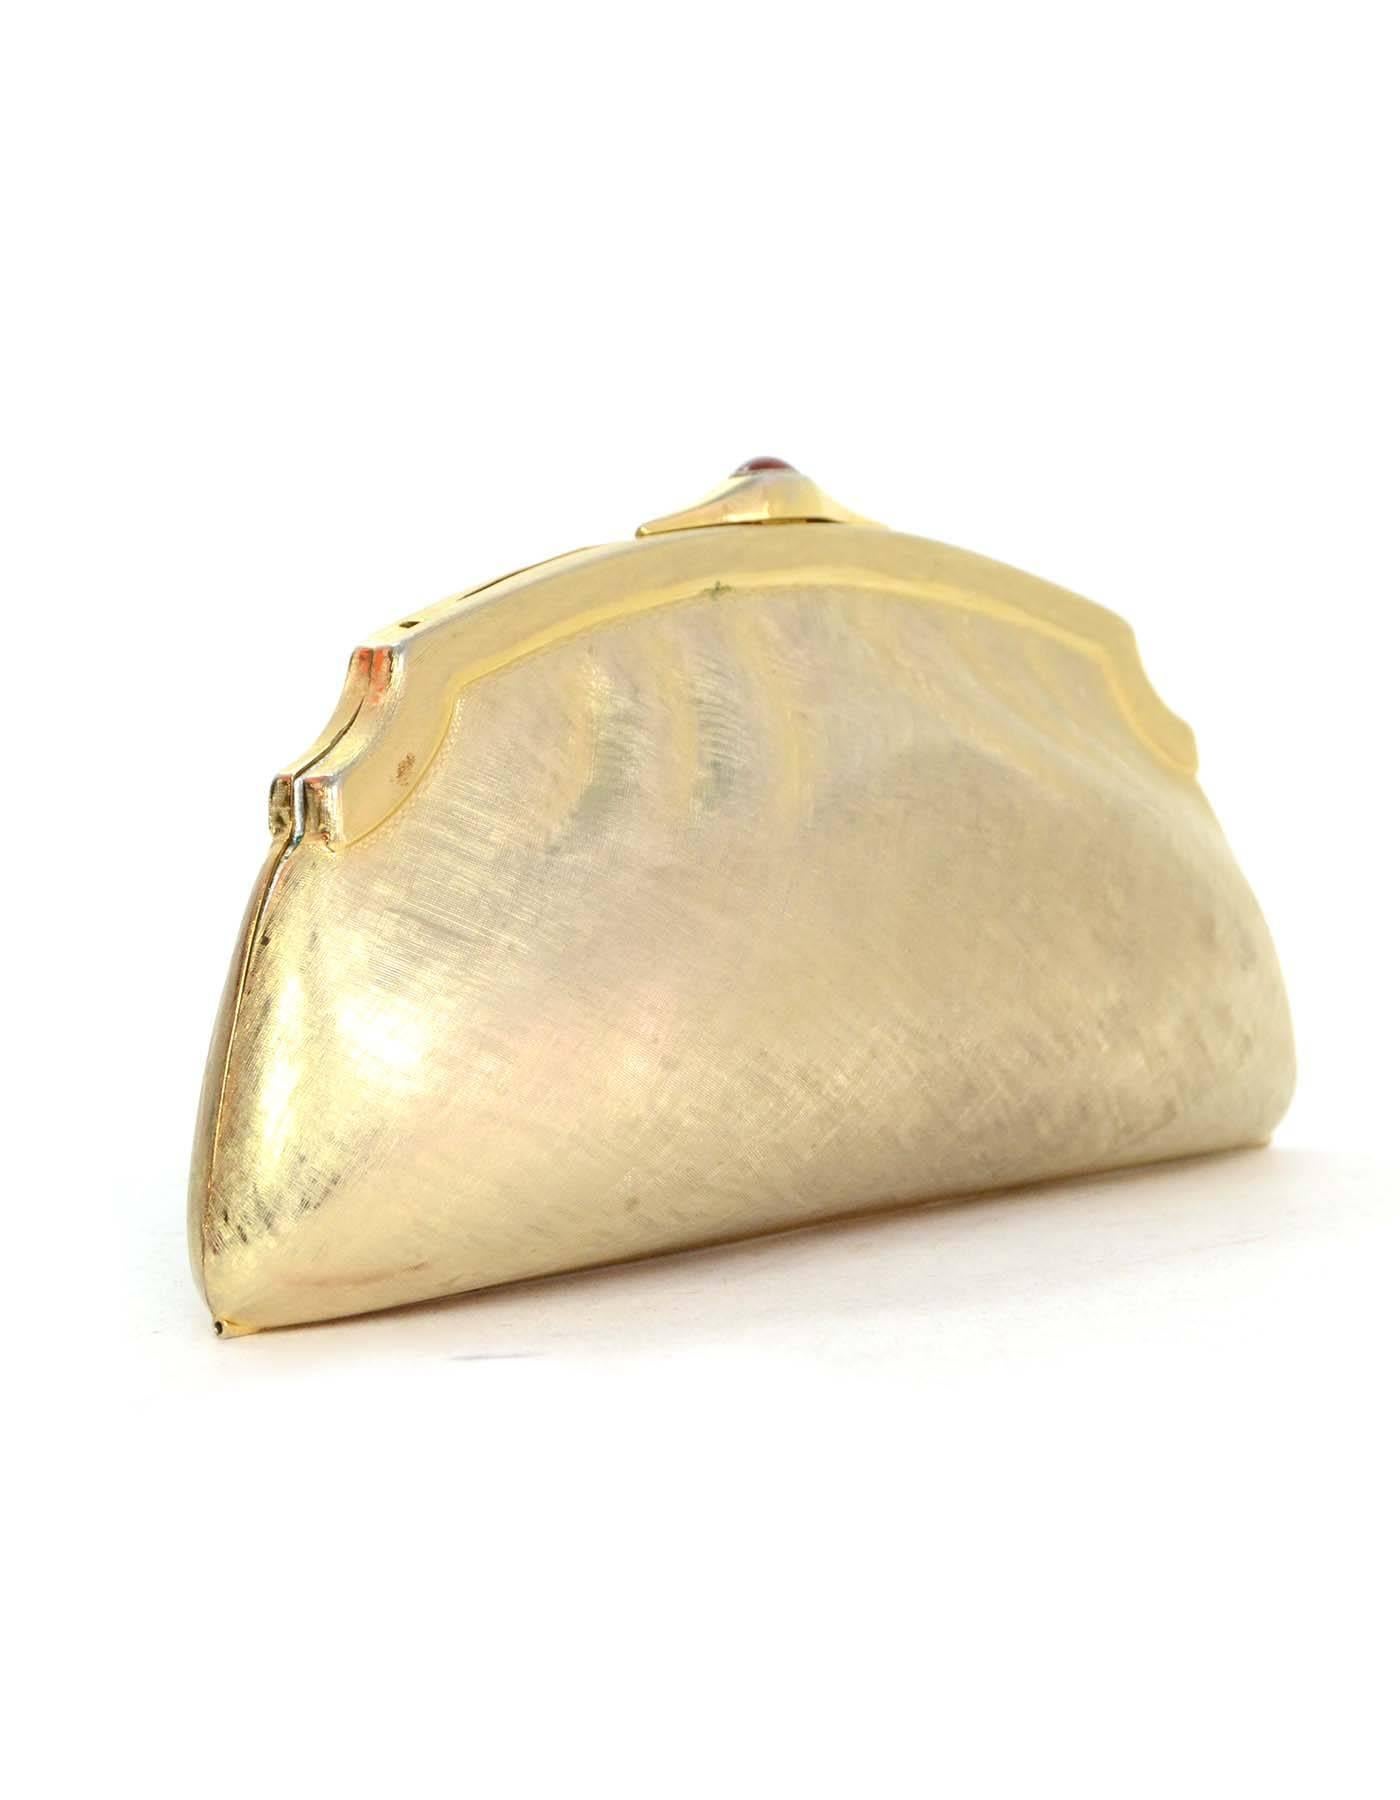 Judith Leiber Textured Gold Clutch
Features optional shoulder strap
Color: Goldtone
Hardware: Goldtone
Materials: Metal 
Lining: Metallic silver leather
Closure/Opening: Carnelian top push lock
Exterior Pockets: None
Interior Pockets: